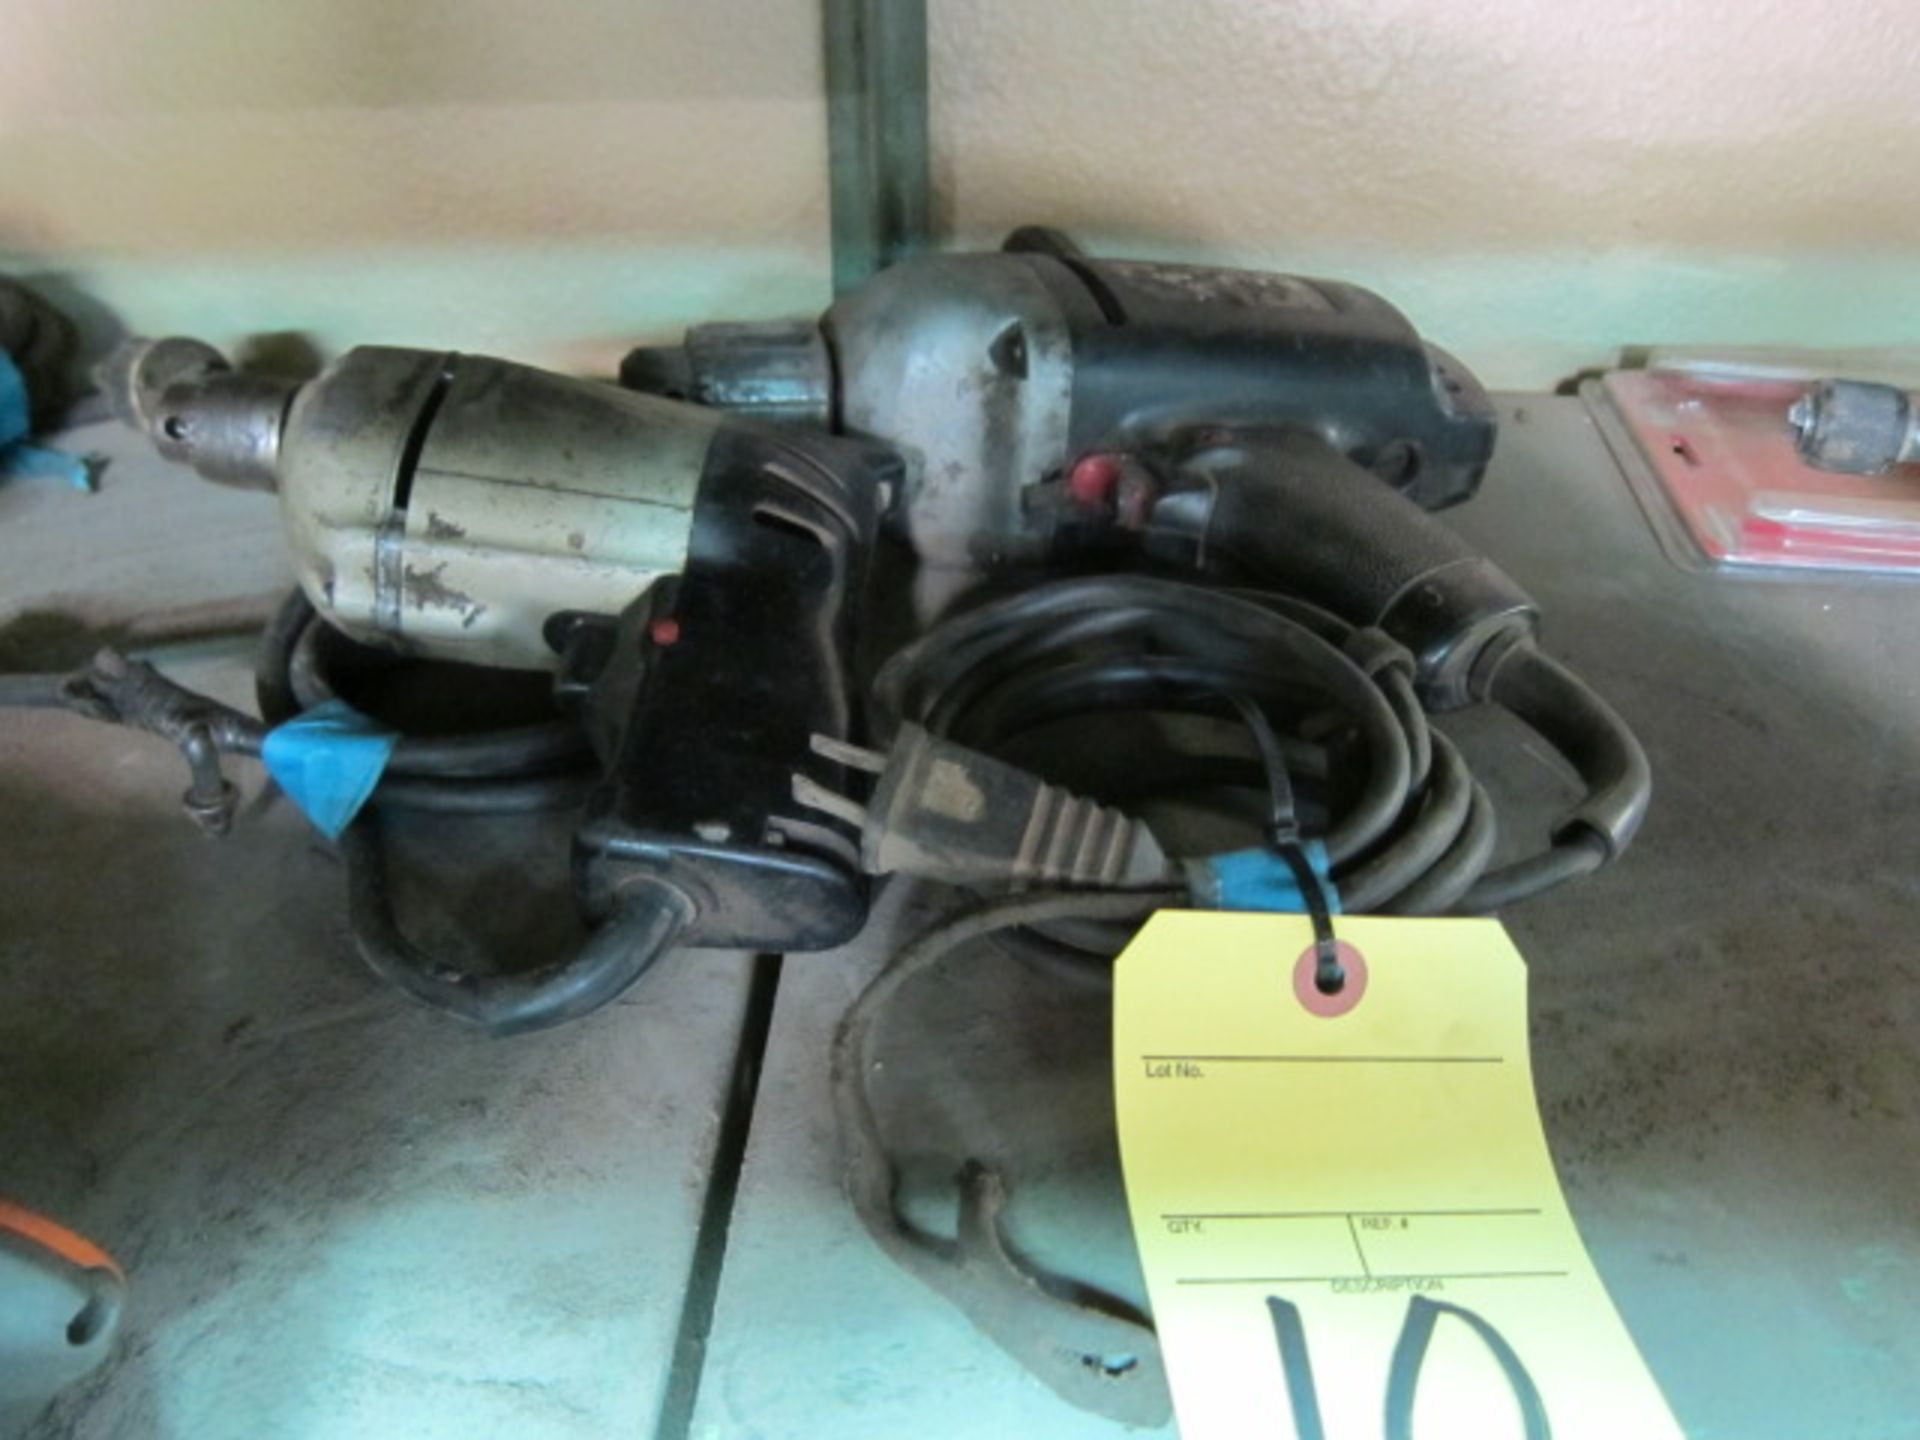 LOT OF ELECTRIC DRILLS (2), assorted